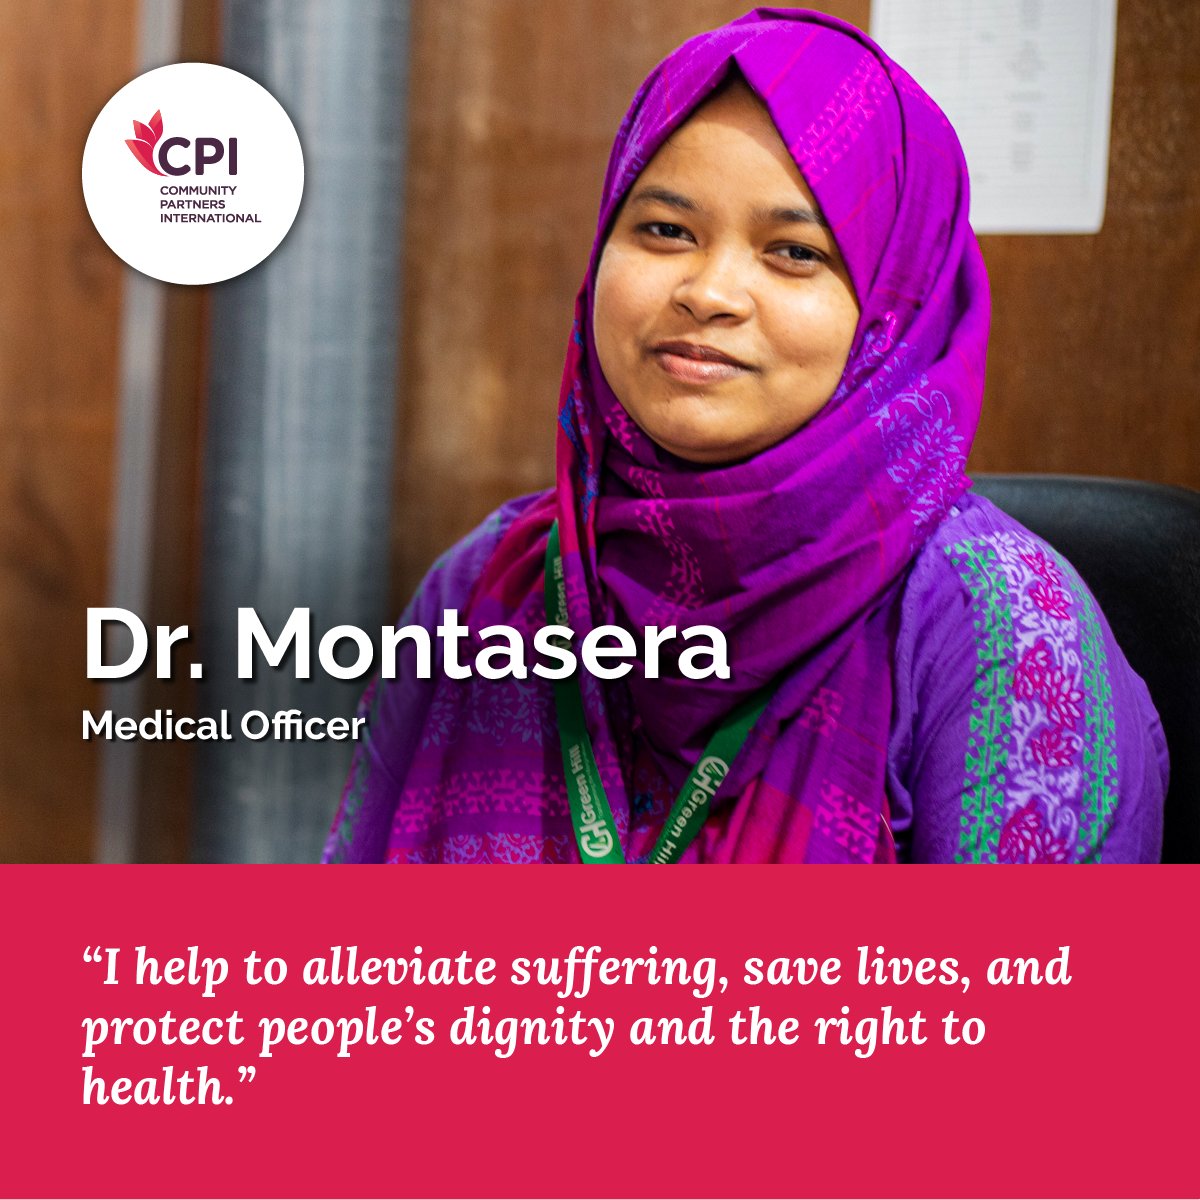 #IWD2024 #InternationalWomensDay #InspireInclusion #InvestinWomen Dr. Montasera is a Medical Officer at the health post supported by Community Partners International in Kutupalong Refugee Camp, Bangladesh. 👉 ow.ly/opvz50QO77K